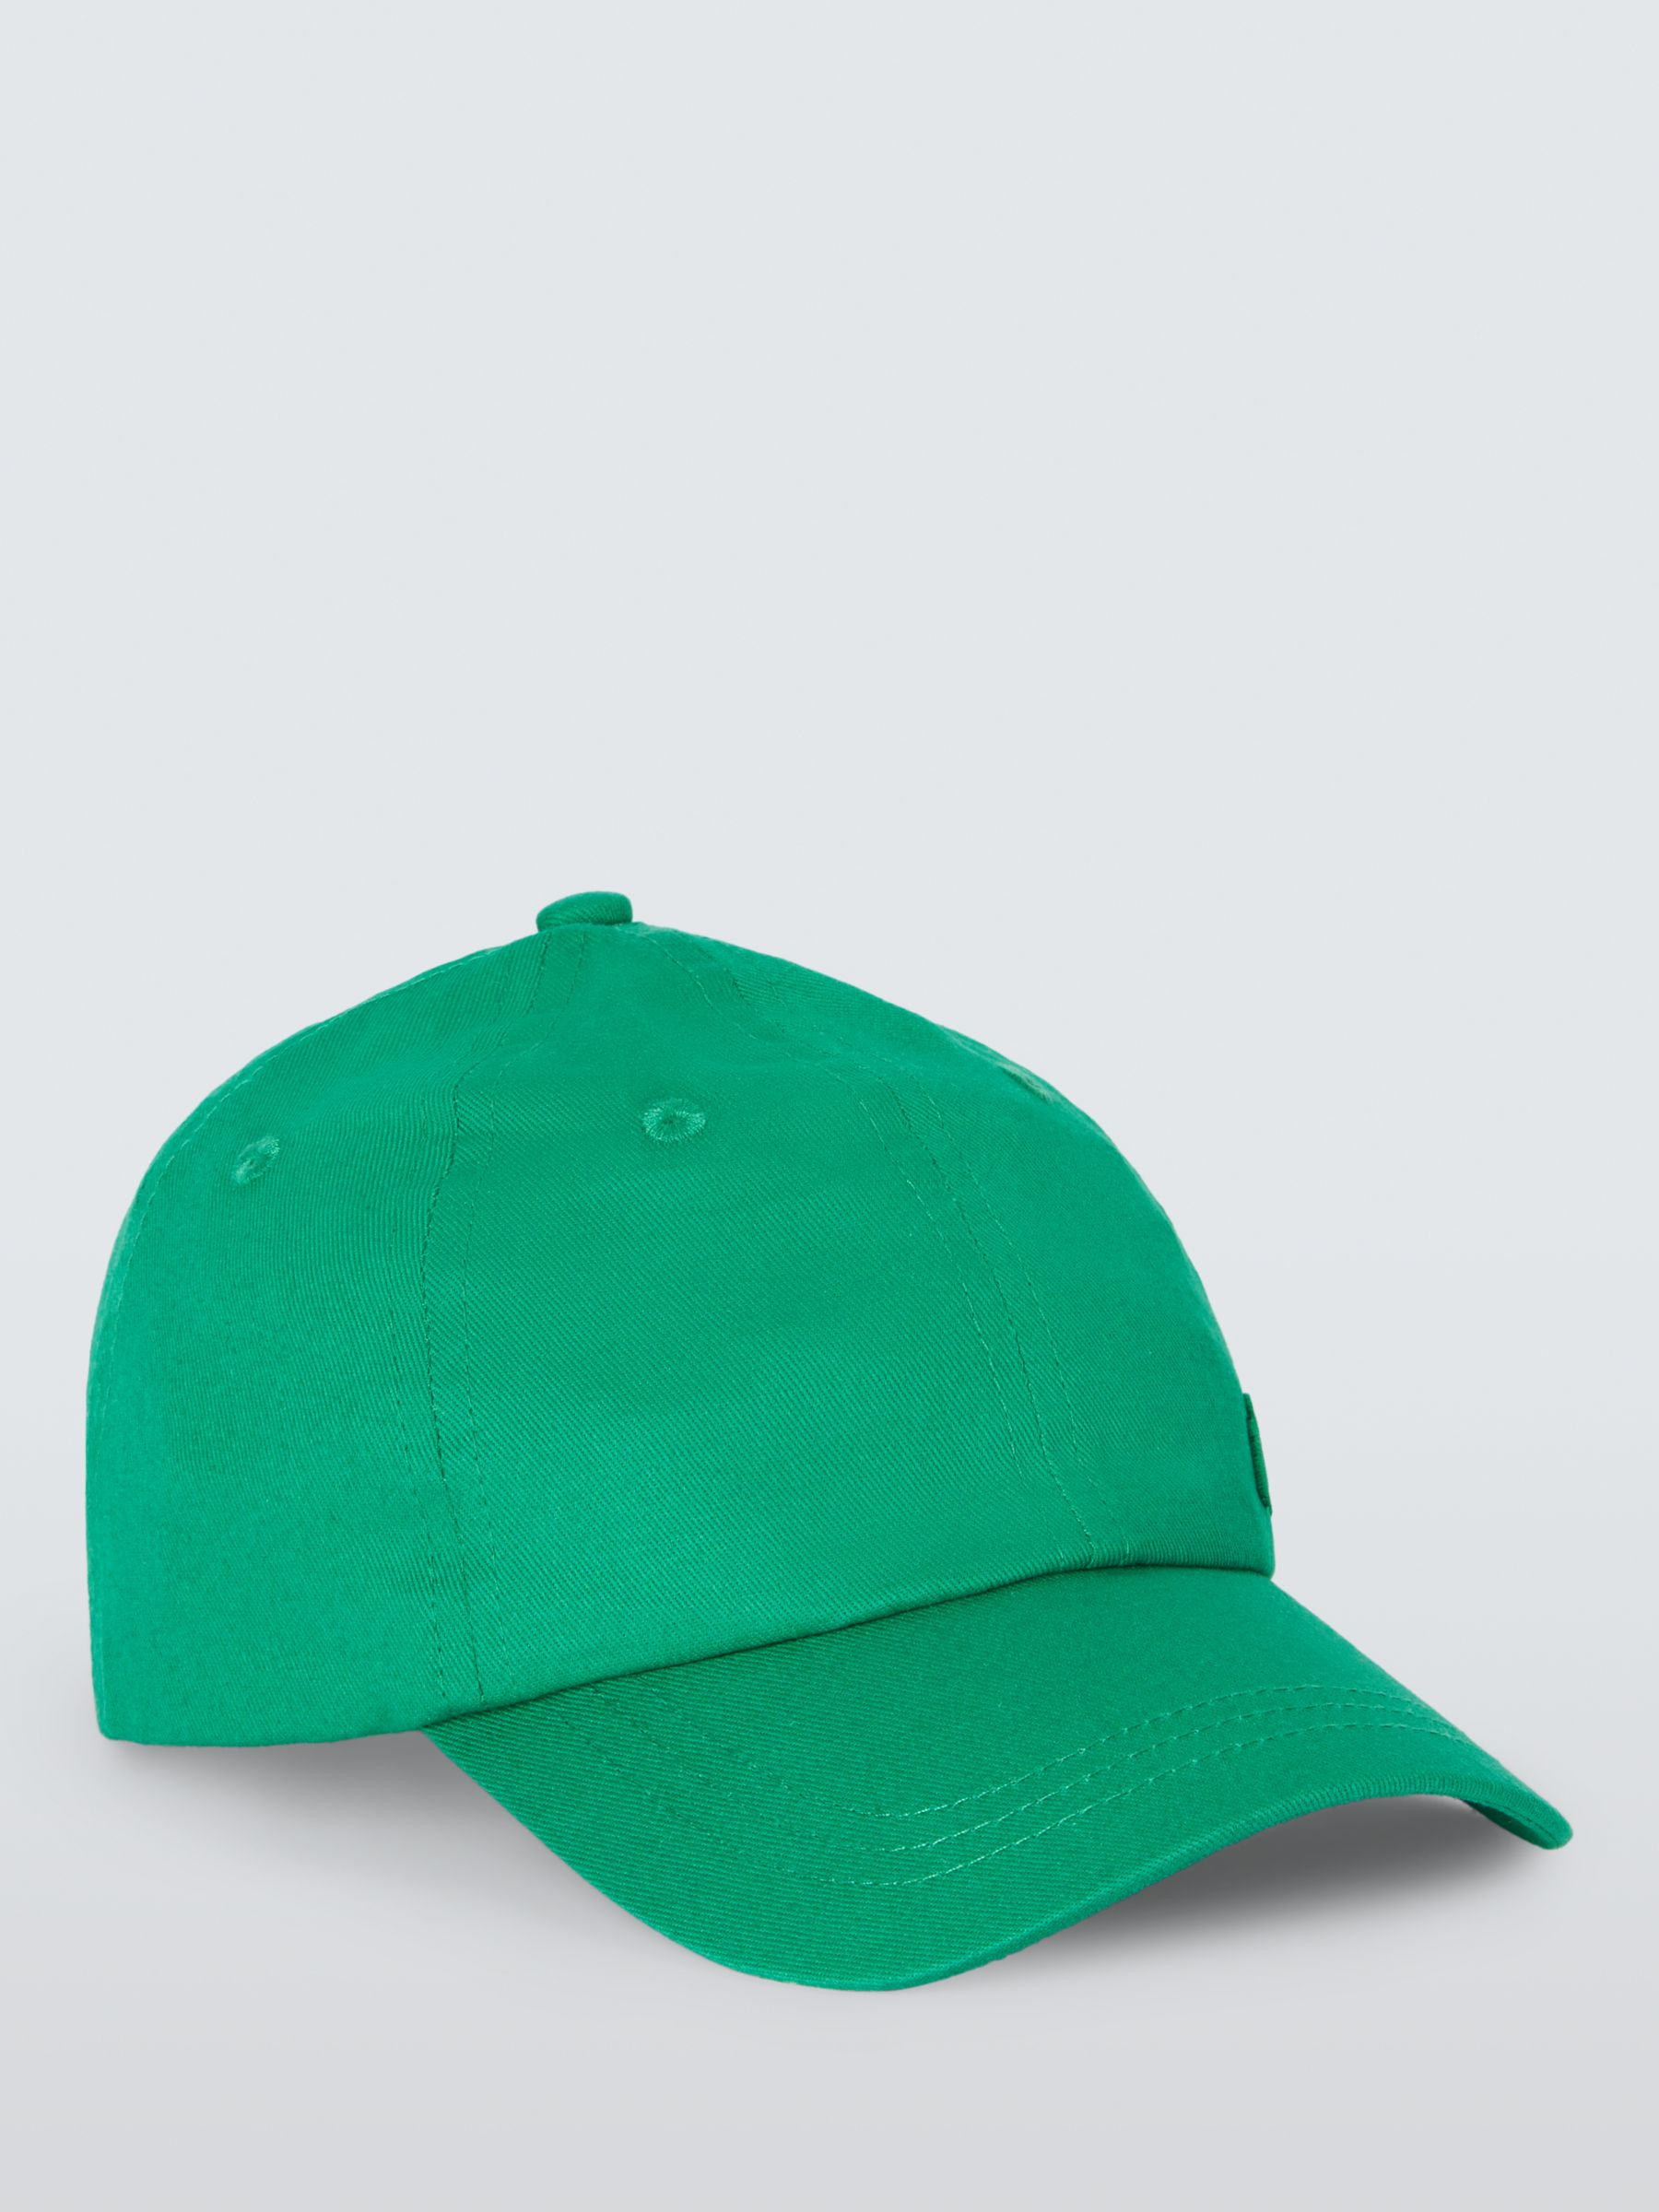 John Lewis ANYDAY Kids' Embroidered Baseball Cap, Green, 0-6 months